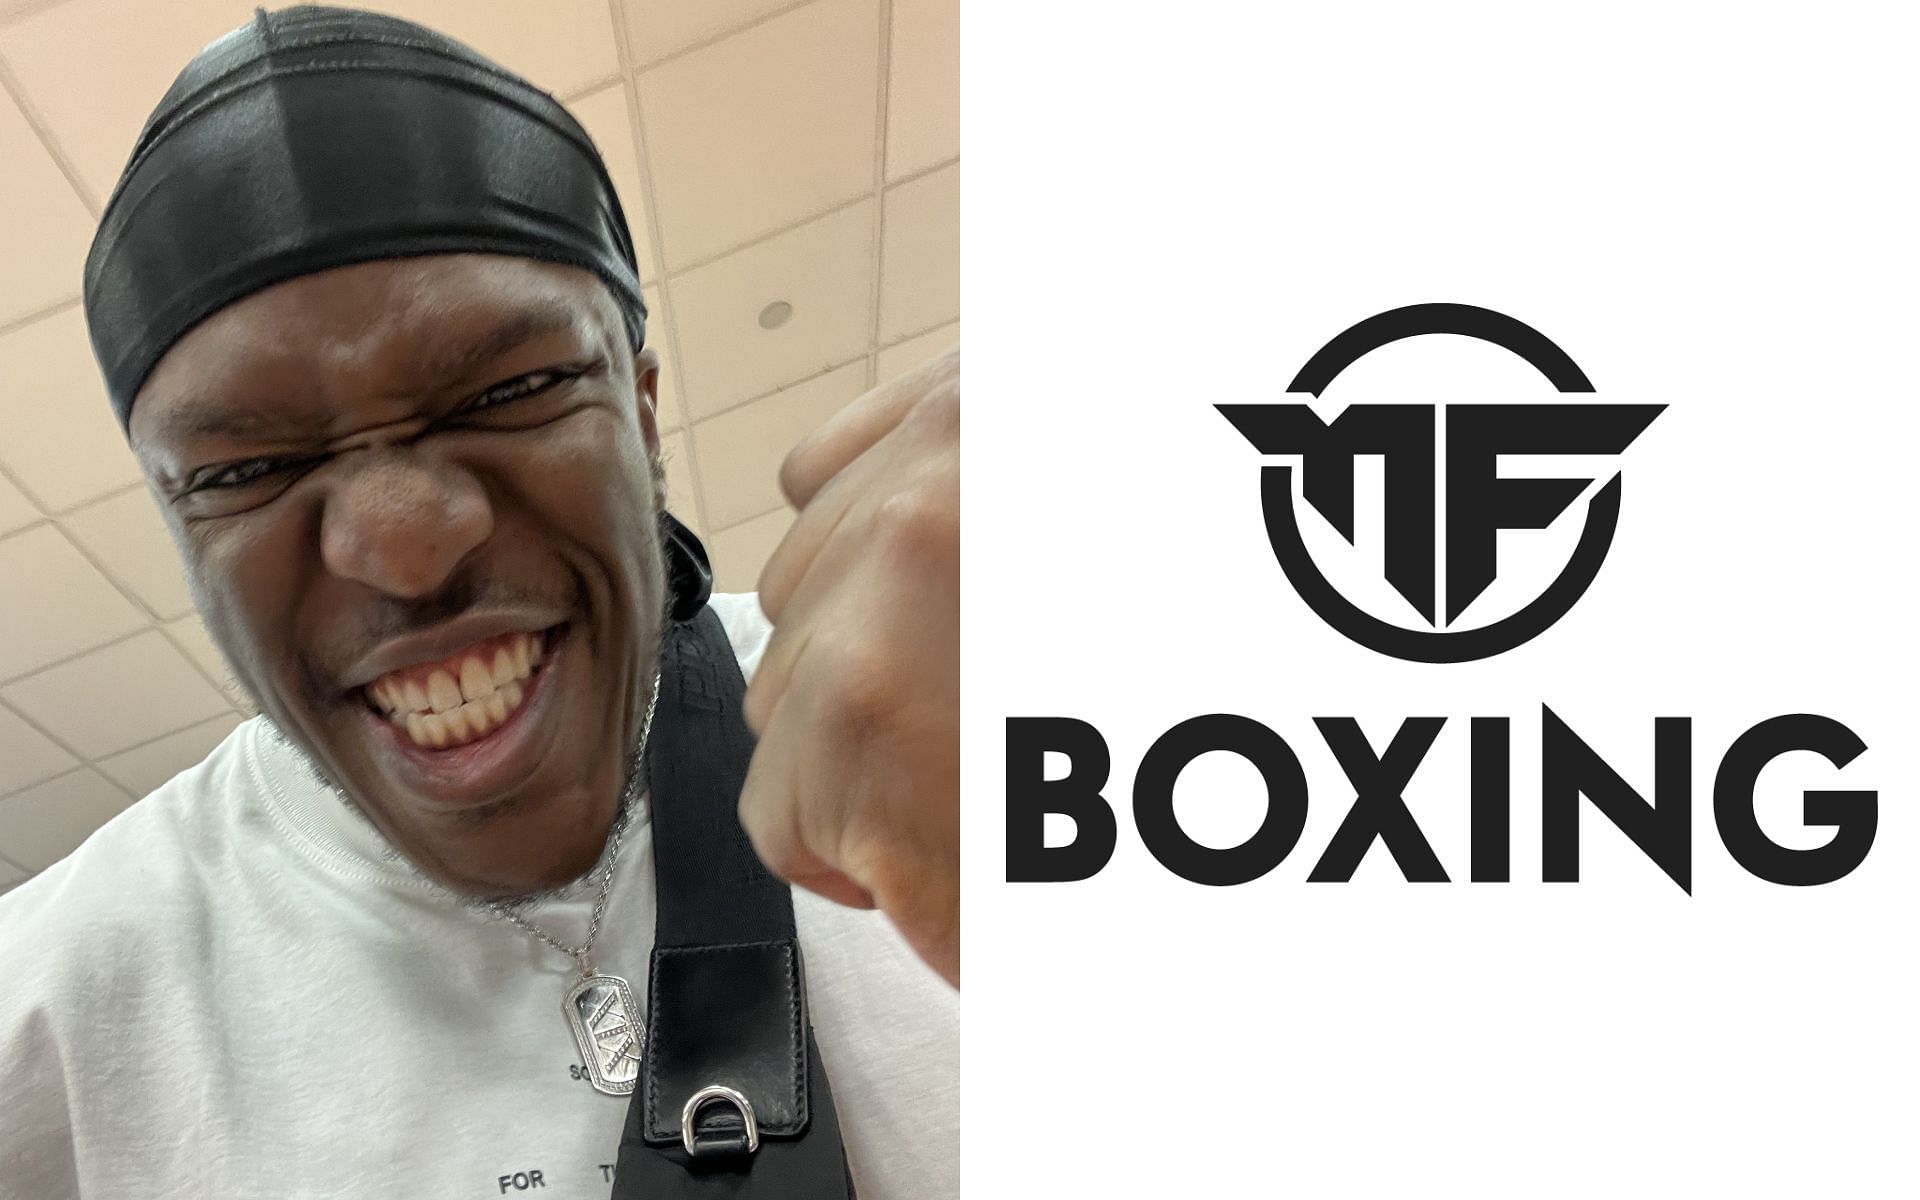 KSI reacts as Misfits Boxing 13 allegedly got swatted after bomb threat was made (Image via @KSI/X and www.wikipedia.com)